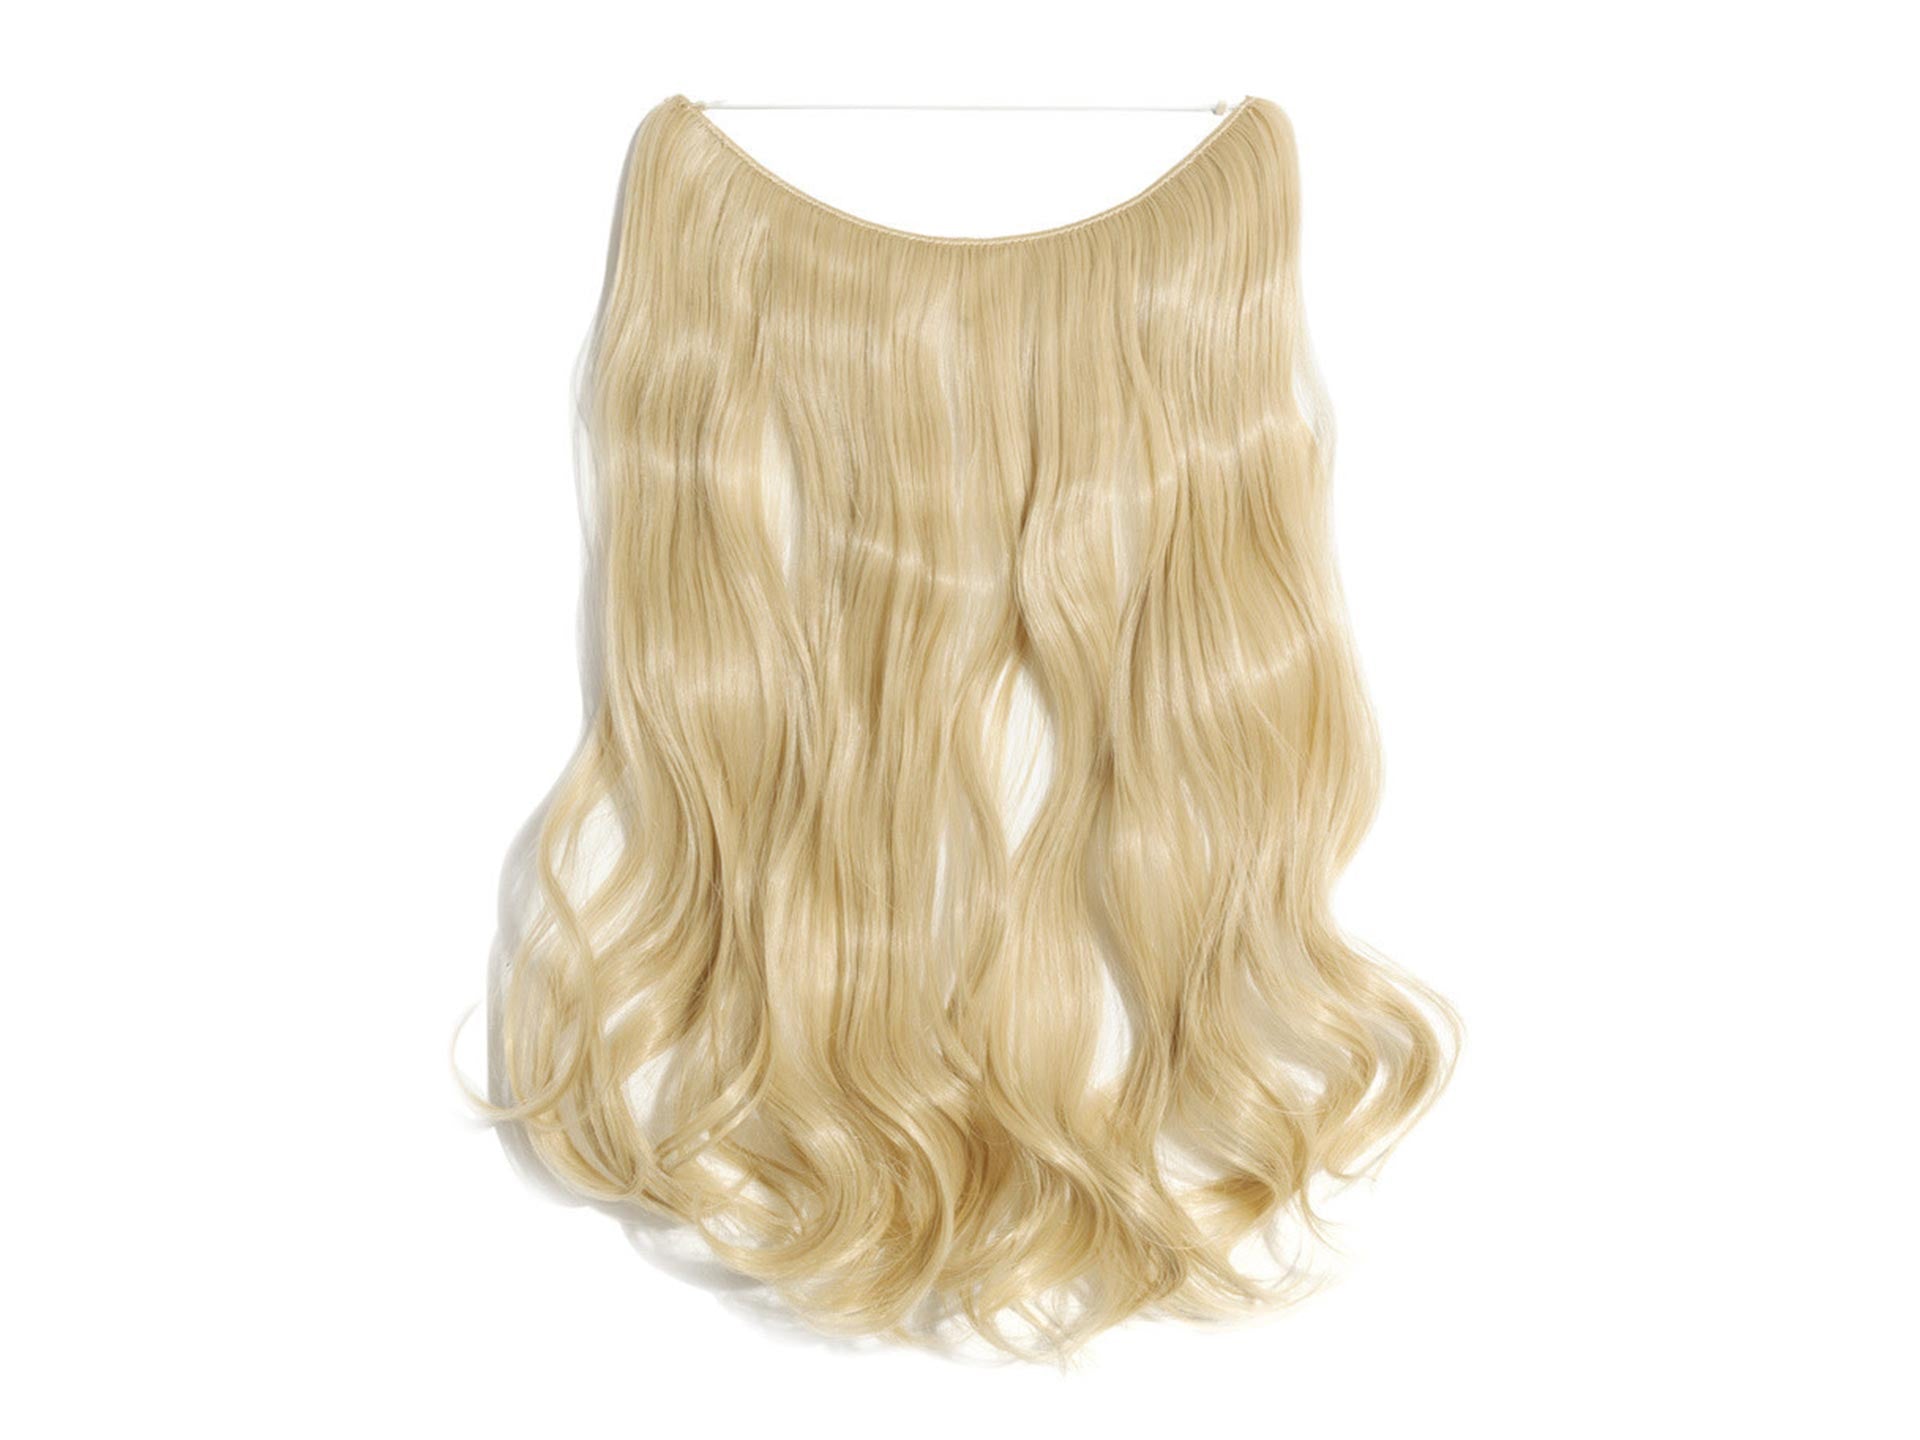 6. Iced Blonde Halo Hair Extensions - wide 1